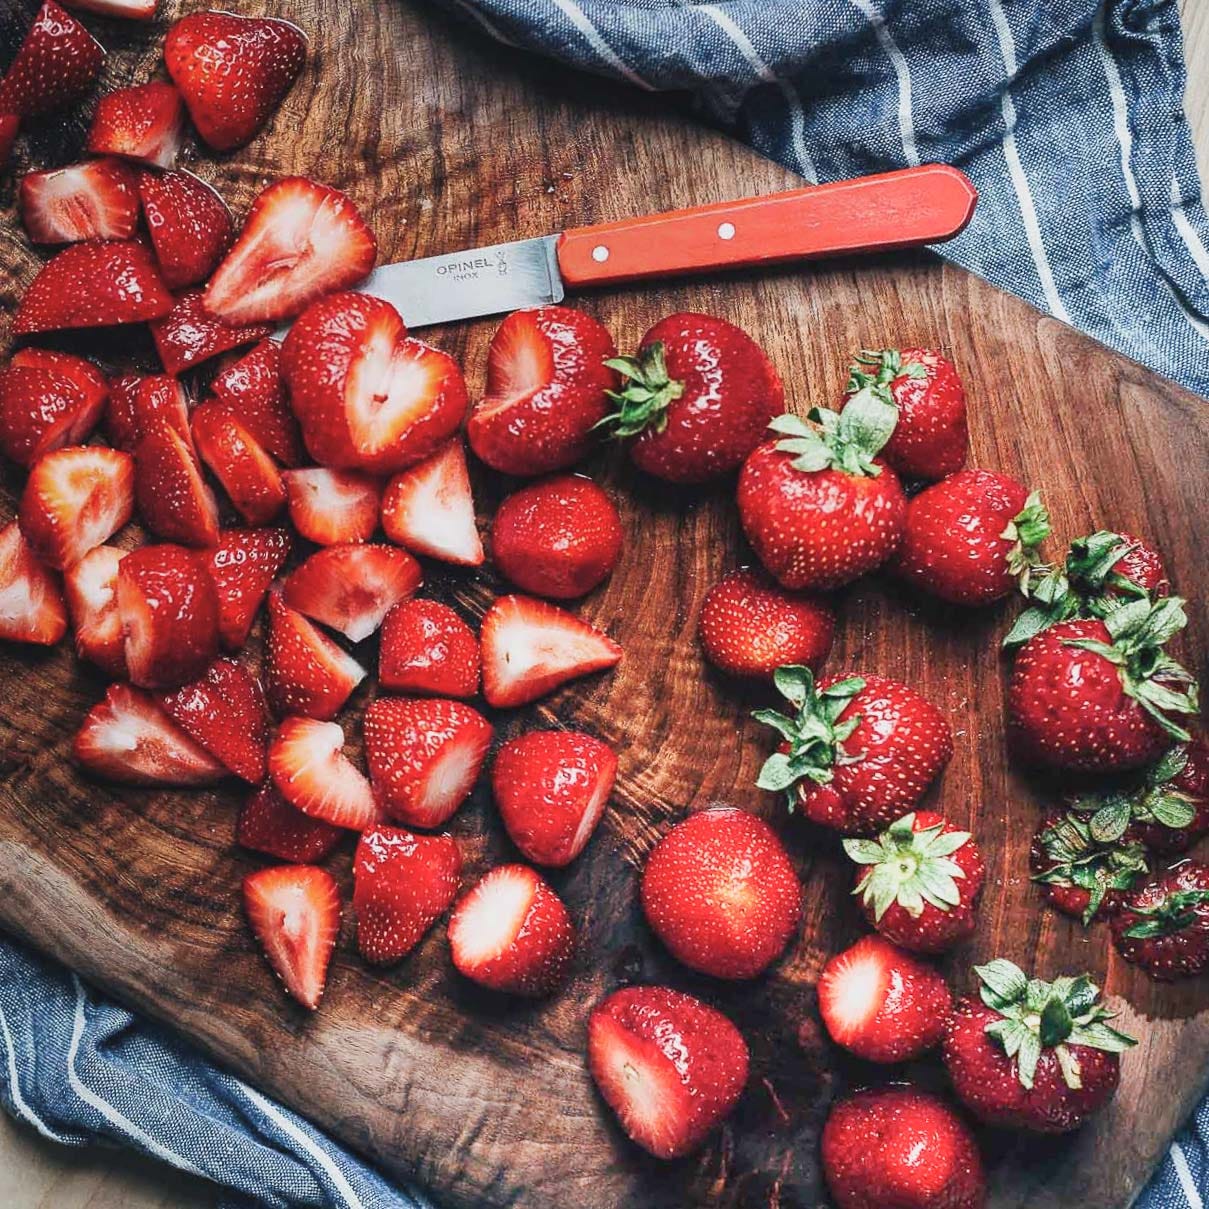 A cutting board covered in whole and sliced strawberries